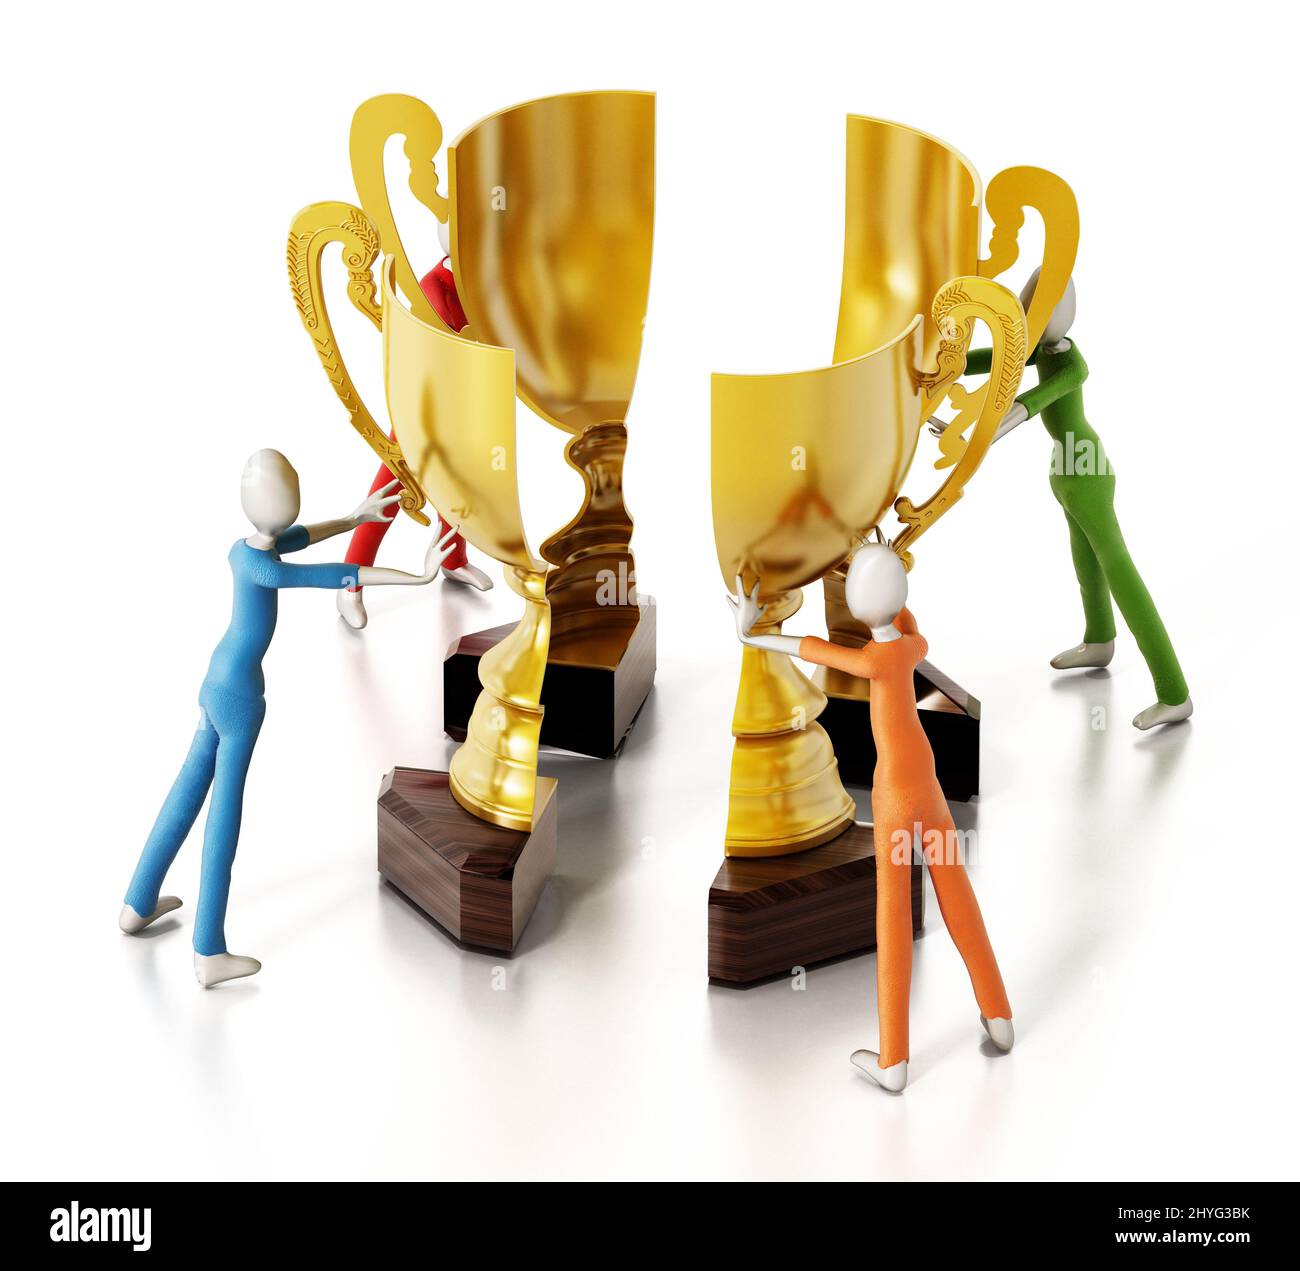 Four 3D figures bring together parts of the golden cup. 3D illustration. Stock Photo